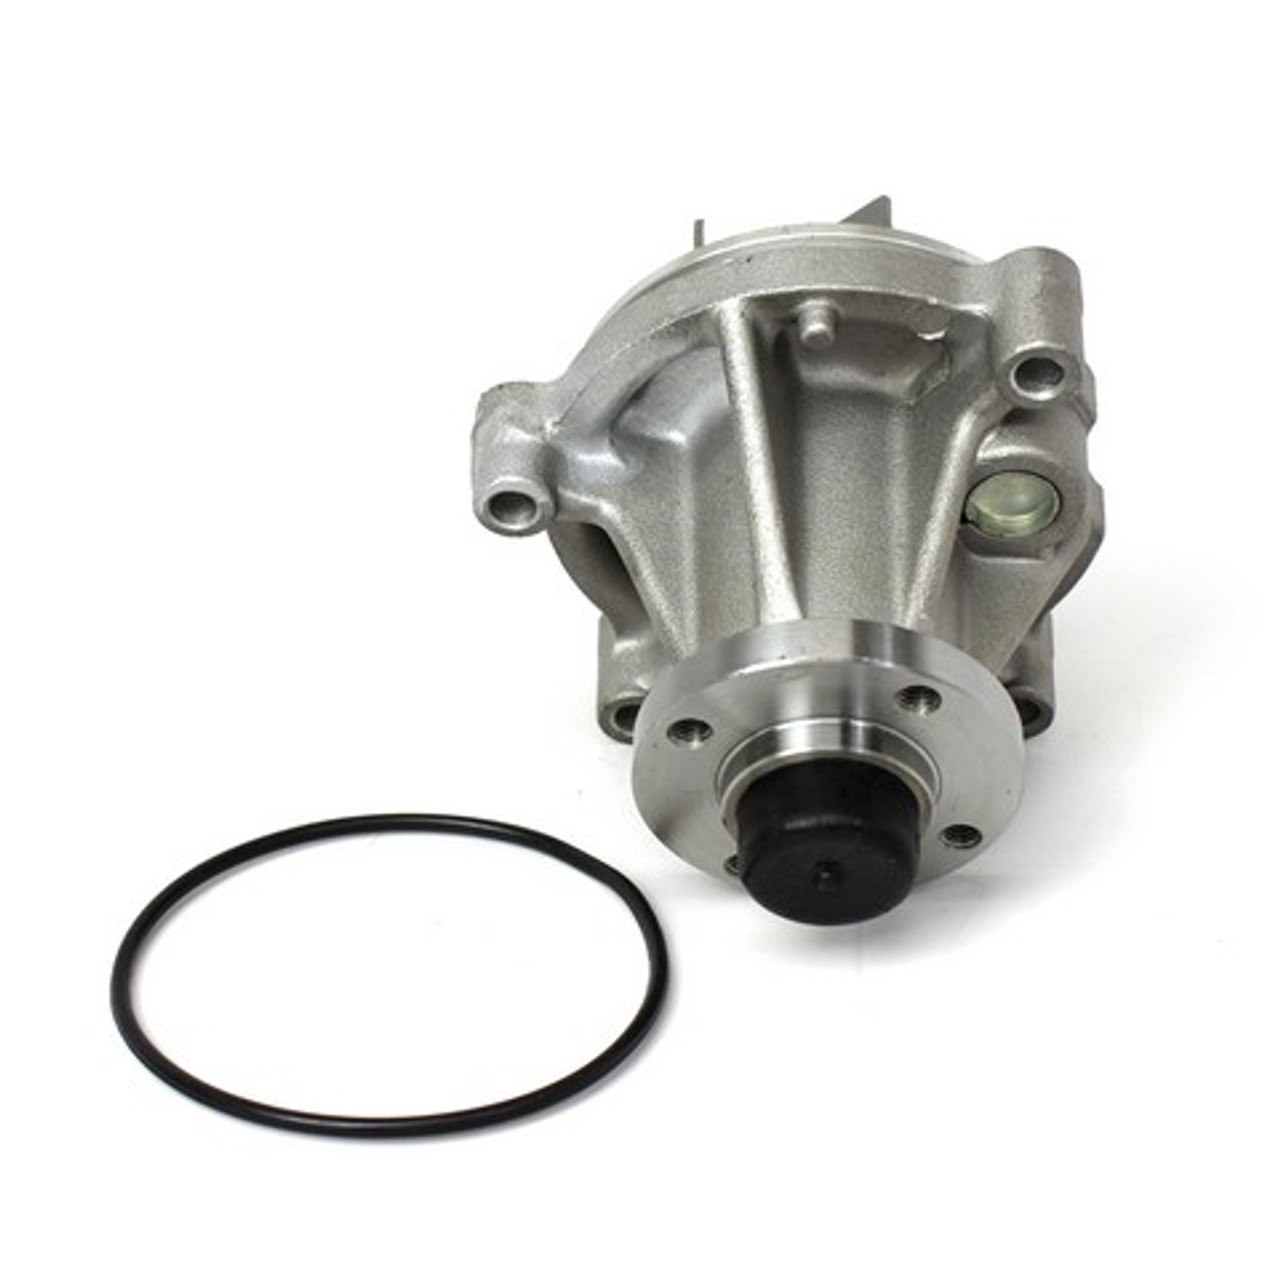 Water Pump 5.4L 2011 Ford E-250 - WP4170.48